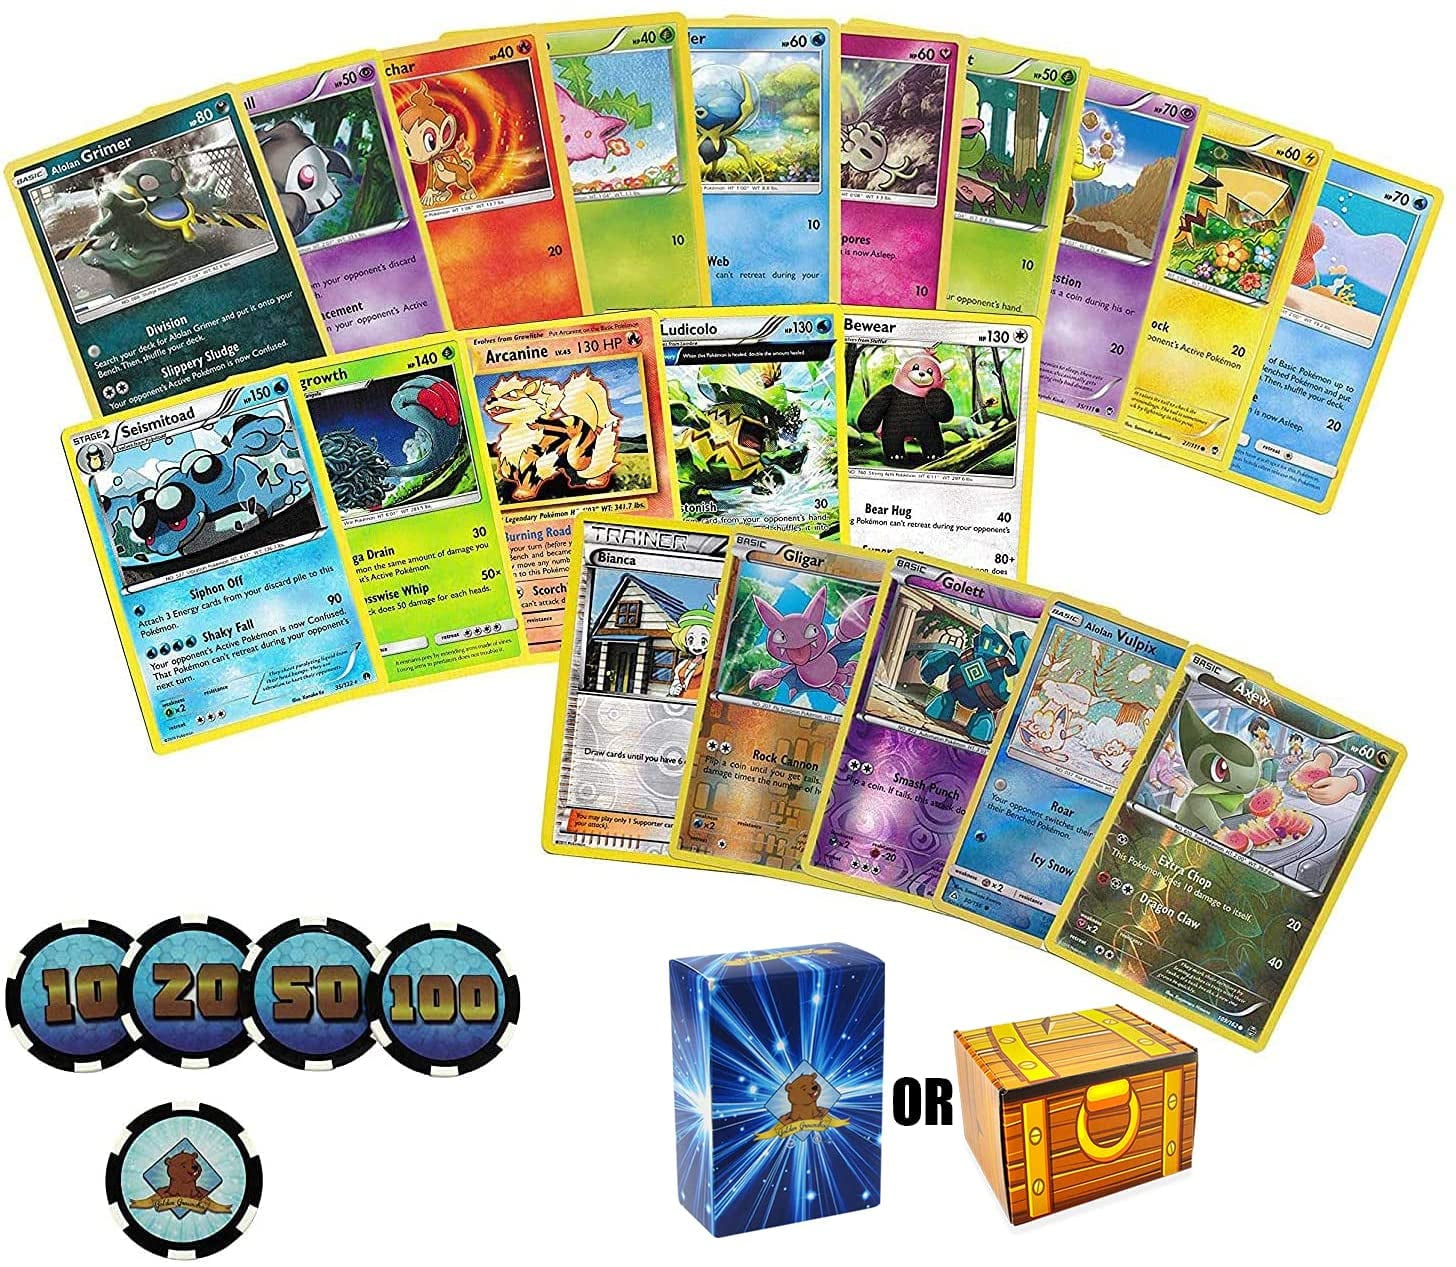 Pokemon Plant Leaf Type Common and Uncommon Cards Pick Your Card!